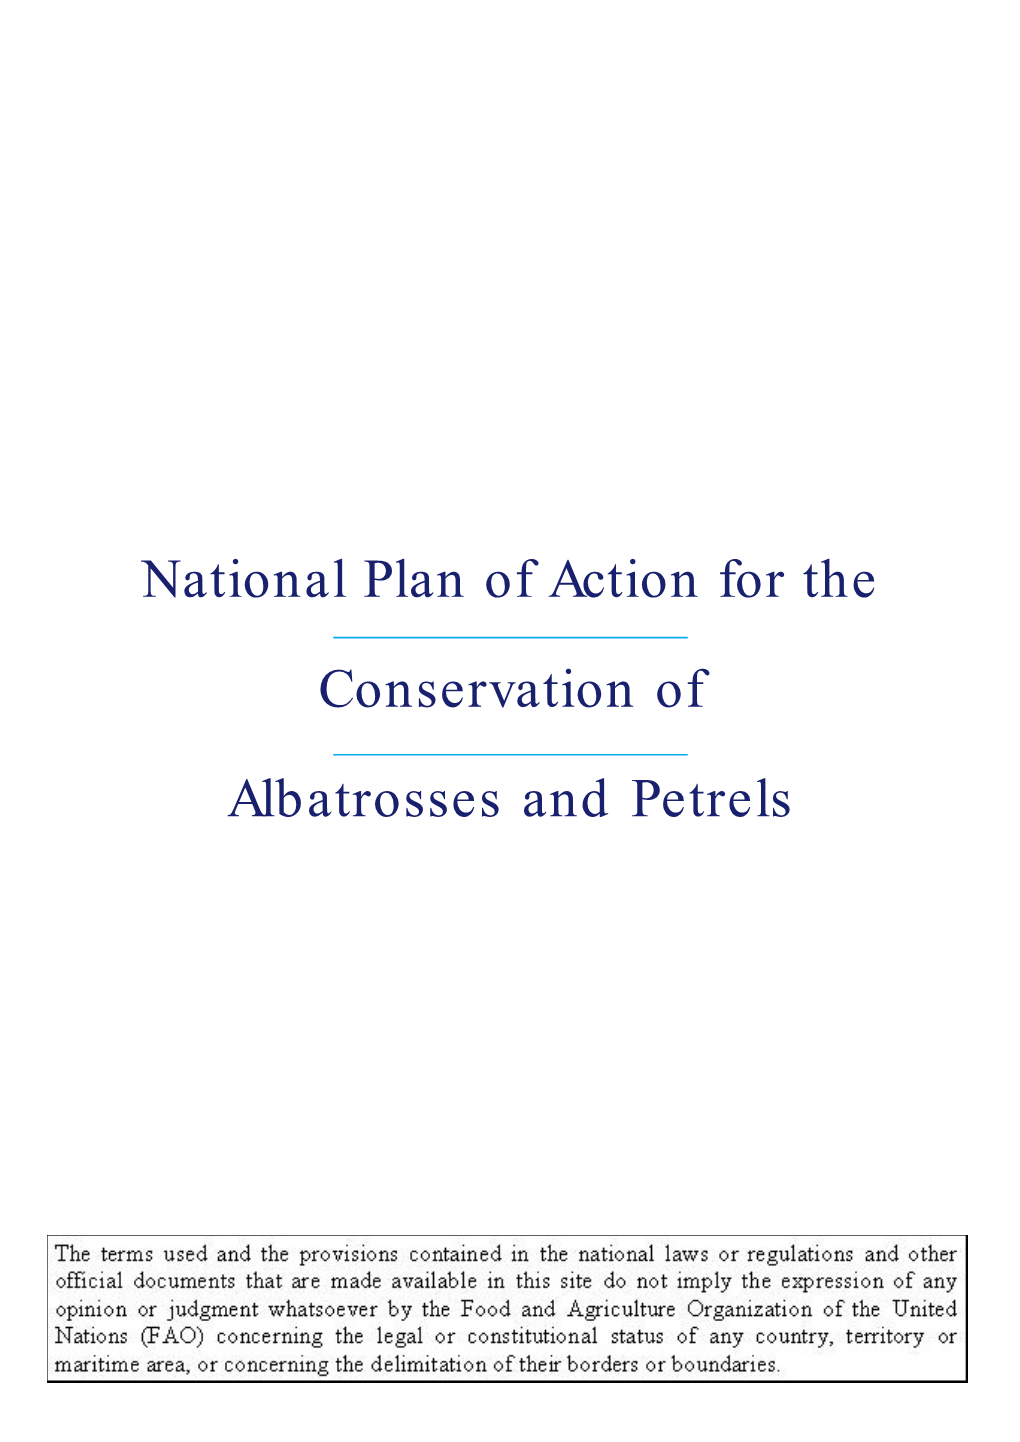 National Plan of Action for the Conservation of Albatrosses and Petrels / Tatiana Neves…[Et Al.]